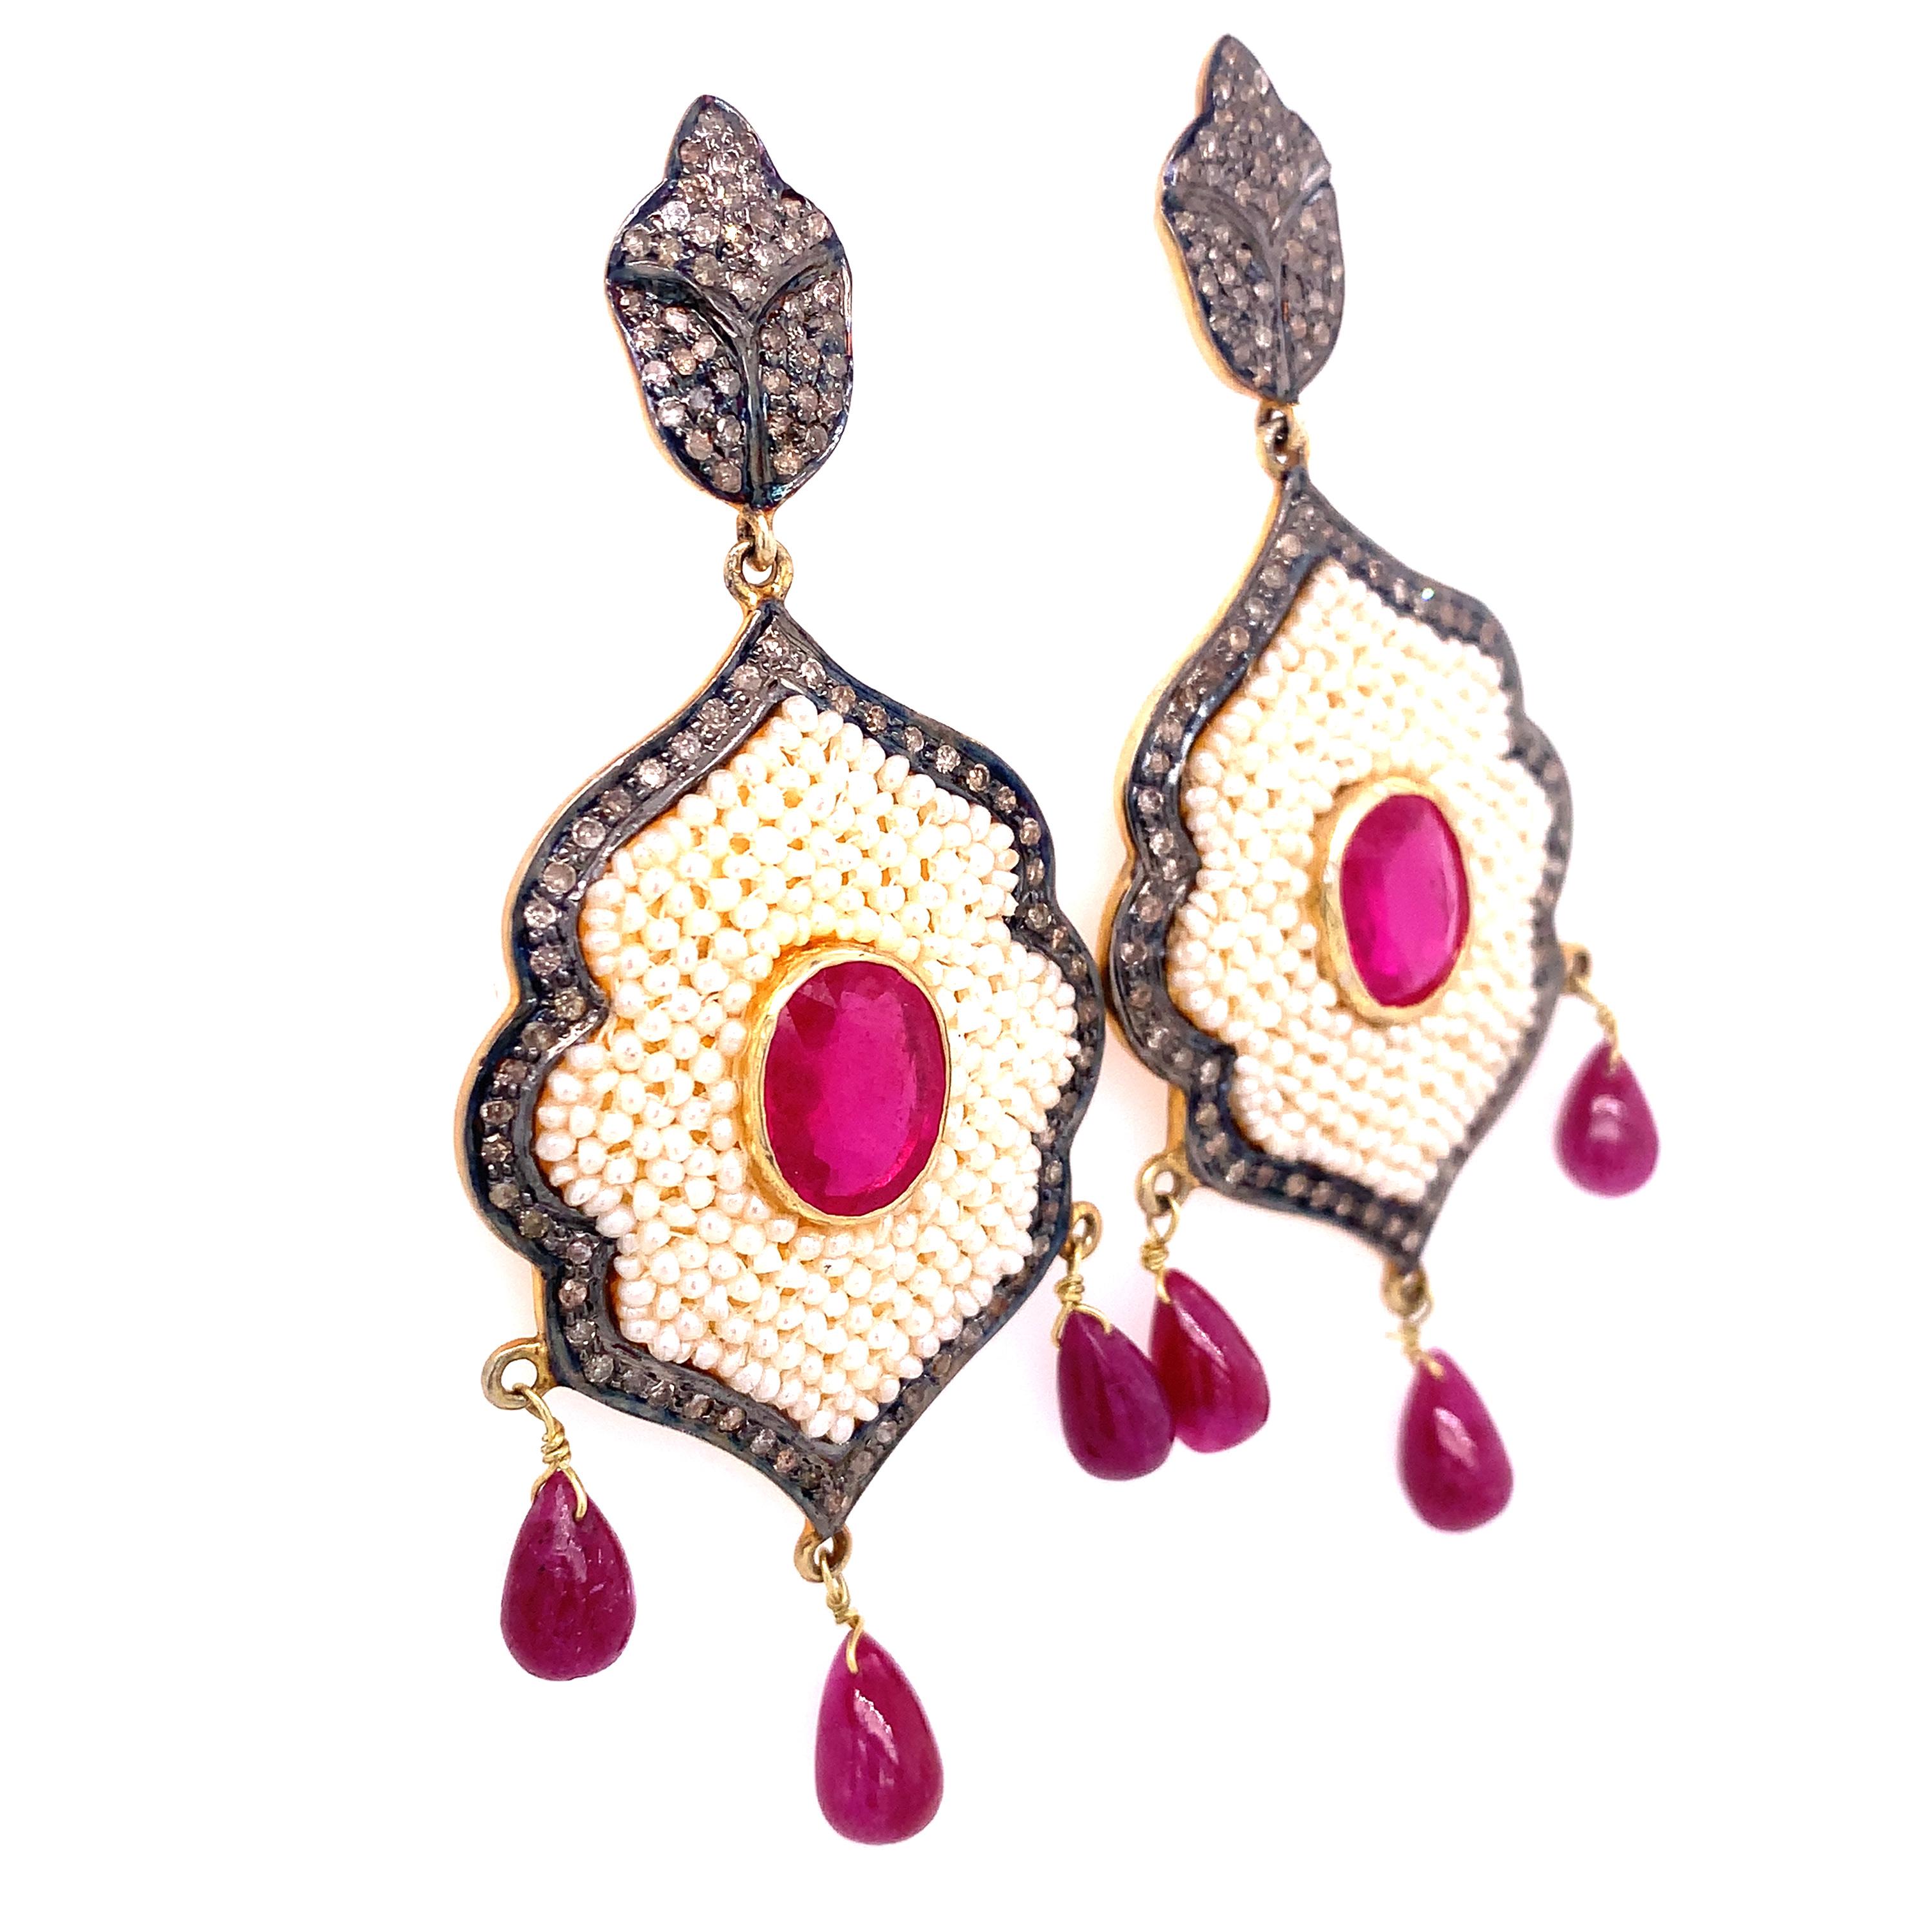 Rustic Collection 

Rustic Diamonds with Rubies and Seed Pearl chandelier earrings set in sterling silver and 14K gold plating. 

Ruby: 2.47ct total weight.
Diamonds: 1.62ct total weight.